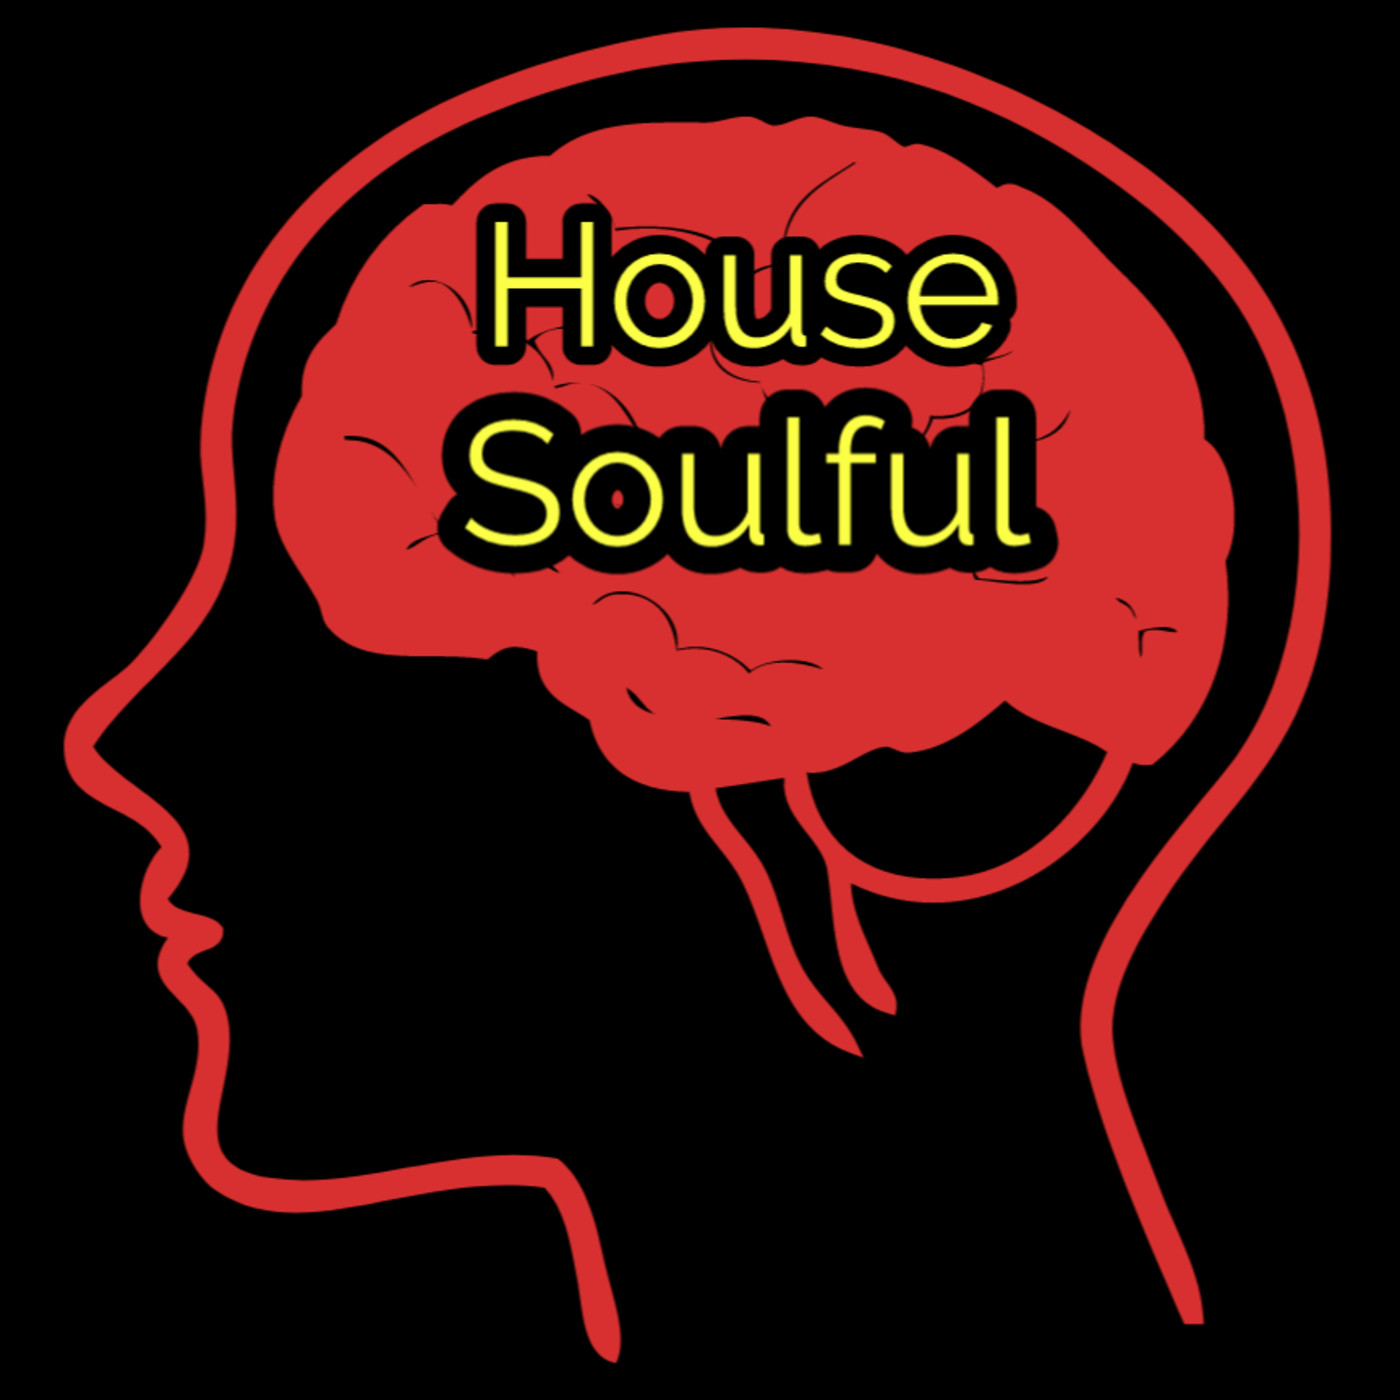 Agosto House, Deep. Soulful by J.Dieguez